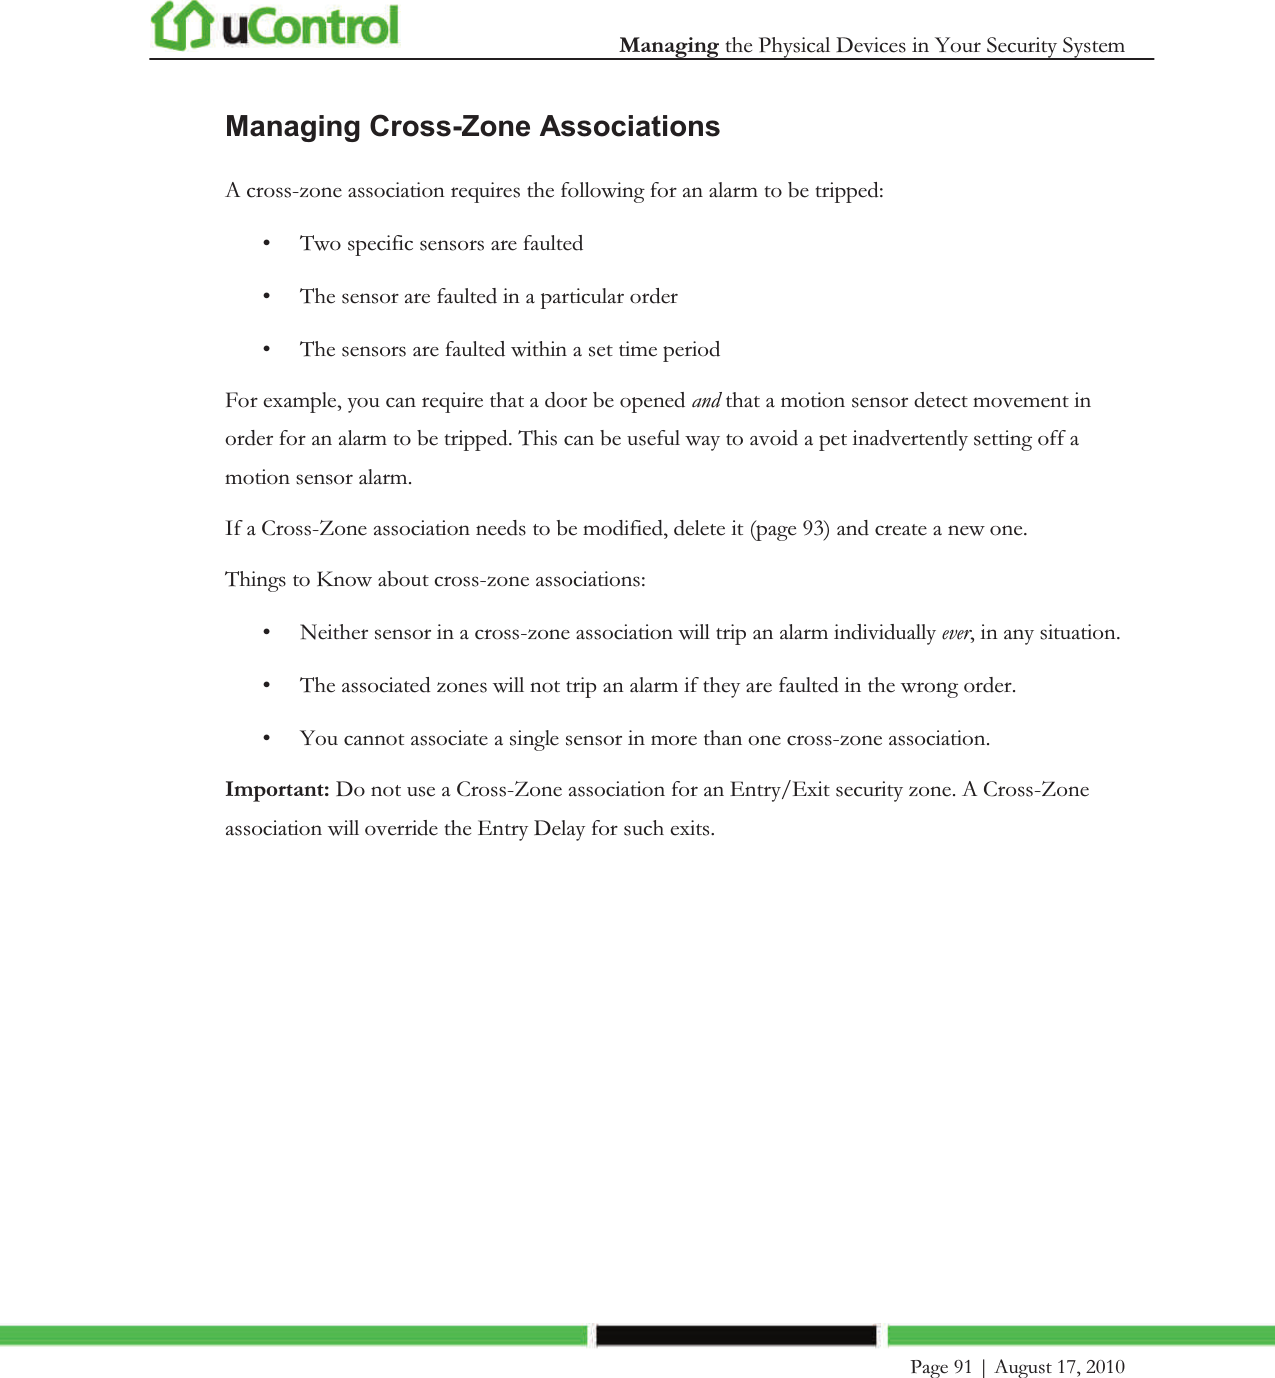  Managing the Physical Devices in Your Security System    Page 91 | August 17, 2010   Managing Cross-Zone Associations A cross-zone association requires the following for an alarm to be tripped: • Two specific sensors are faulted  • The sensor are faulted in a particular order • The sensors are faulted within a set time period For example, you can require that a door be opened and that a motion sensor detect movement in order for an alarm to be tripped. This can be useful way to avoid a pet inadvertently setting off a motion sensor alarm. If a Cross-Zone association needs to be modified, delete it (page 93) and create a new one. Things to Know about cross-zone associations: • Neither sensor in a cross-zone association will trip an alarm individually ever, in any situation. • The associated zones will not trip an alarm if they are faulted in the wrong order. • You cannot associate a single sensor in more than one cross-zone association. Important: Do not use a Cross-Zone association for an Entry/Exit security zone. A Cross-Zone association will override the Entry Delay for such exits.  